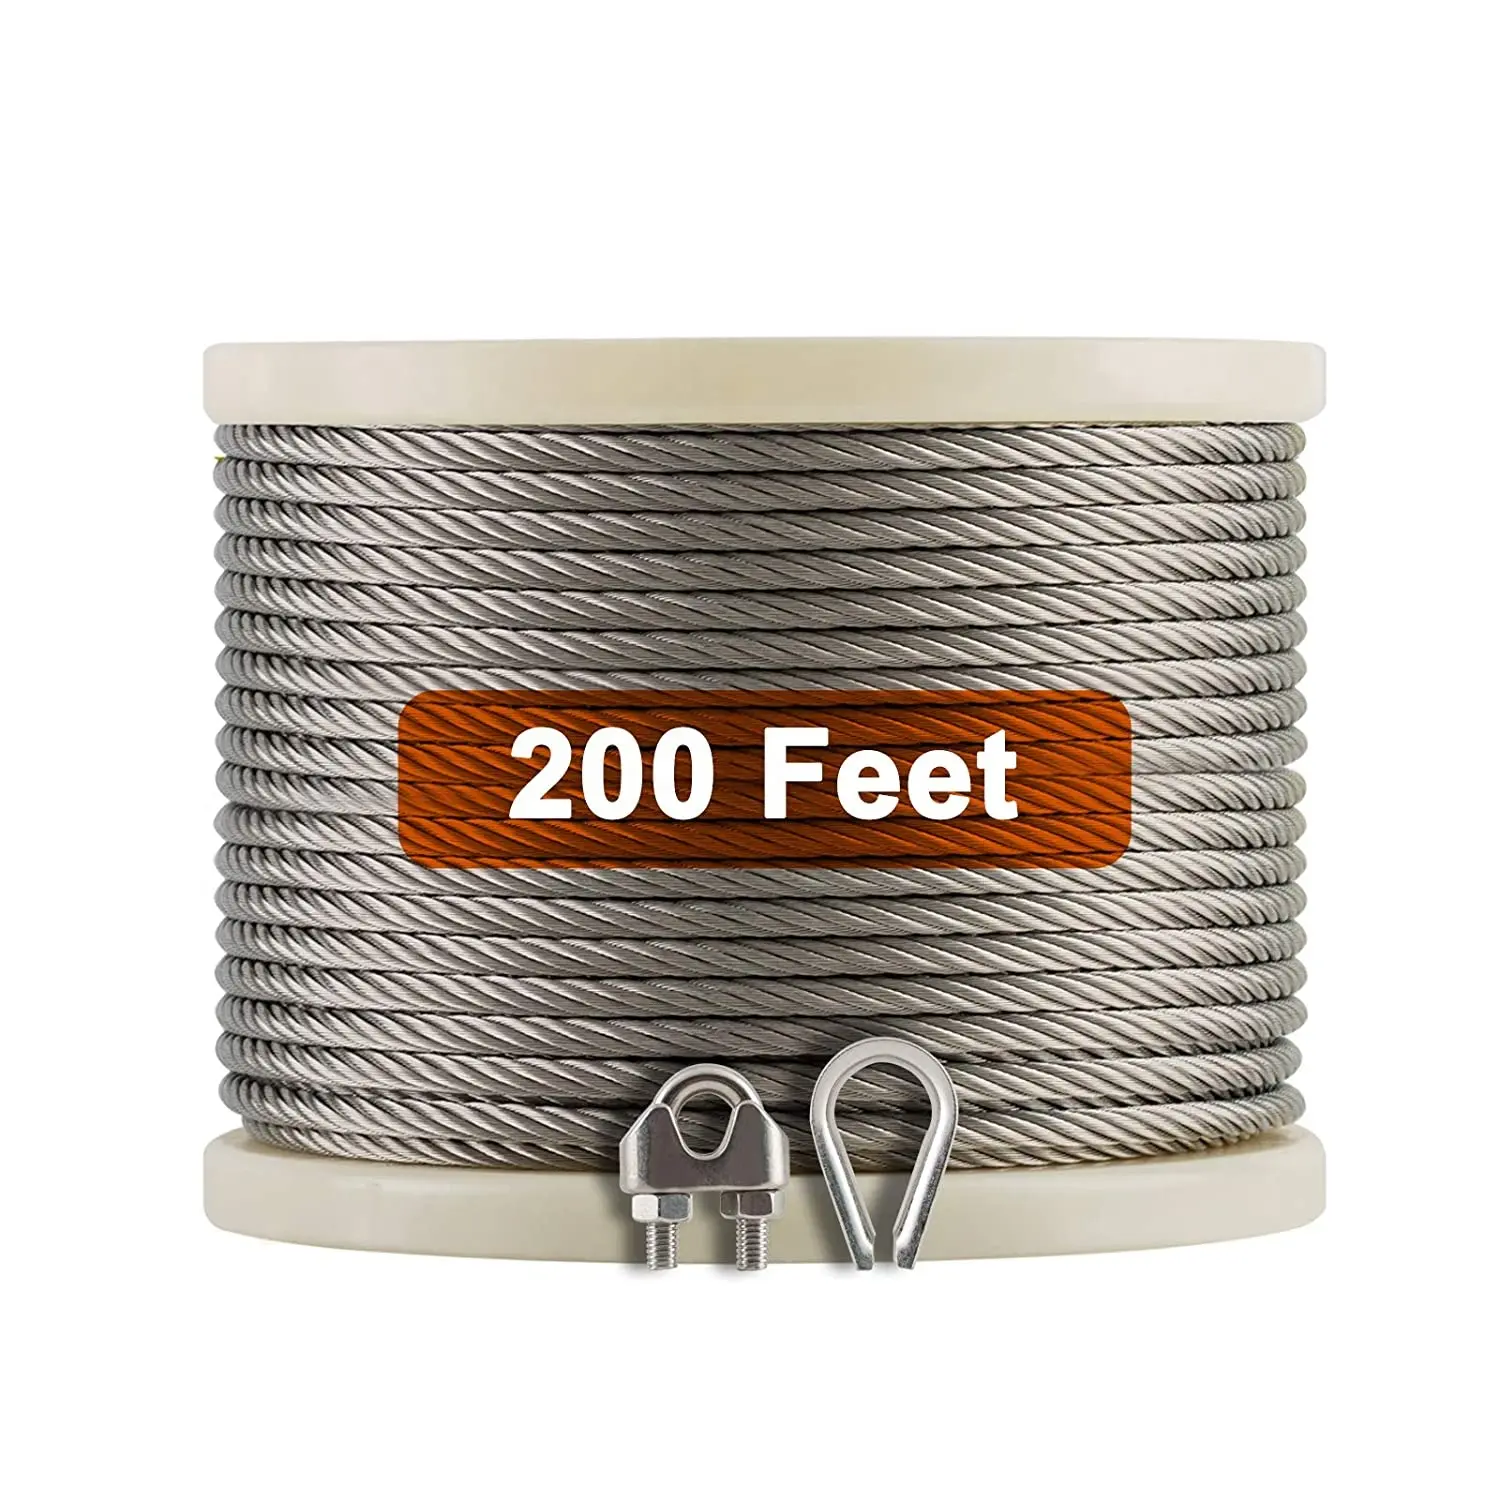 200FT 7 x 19 Strands Construction 1/4 Zip line SS304 316I Stainless Steel Aircraft Cable with Clamps & Thimbles